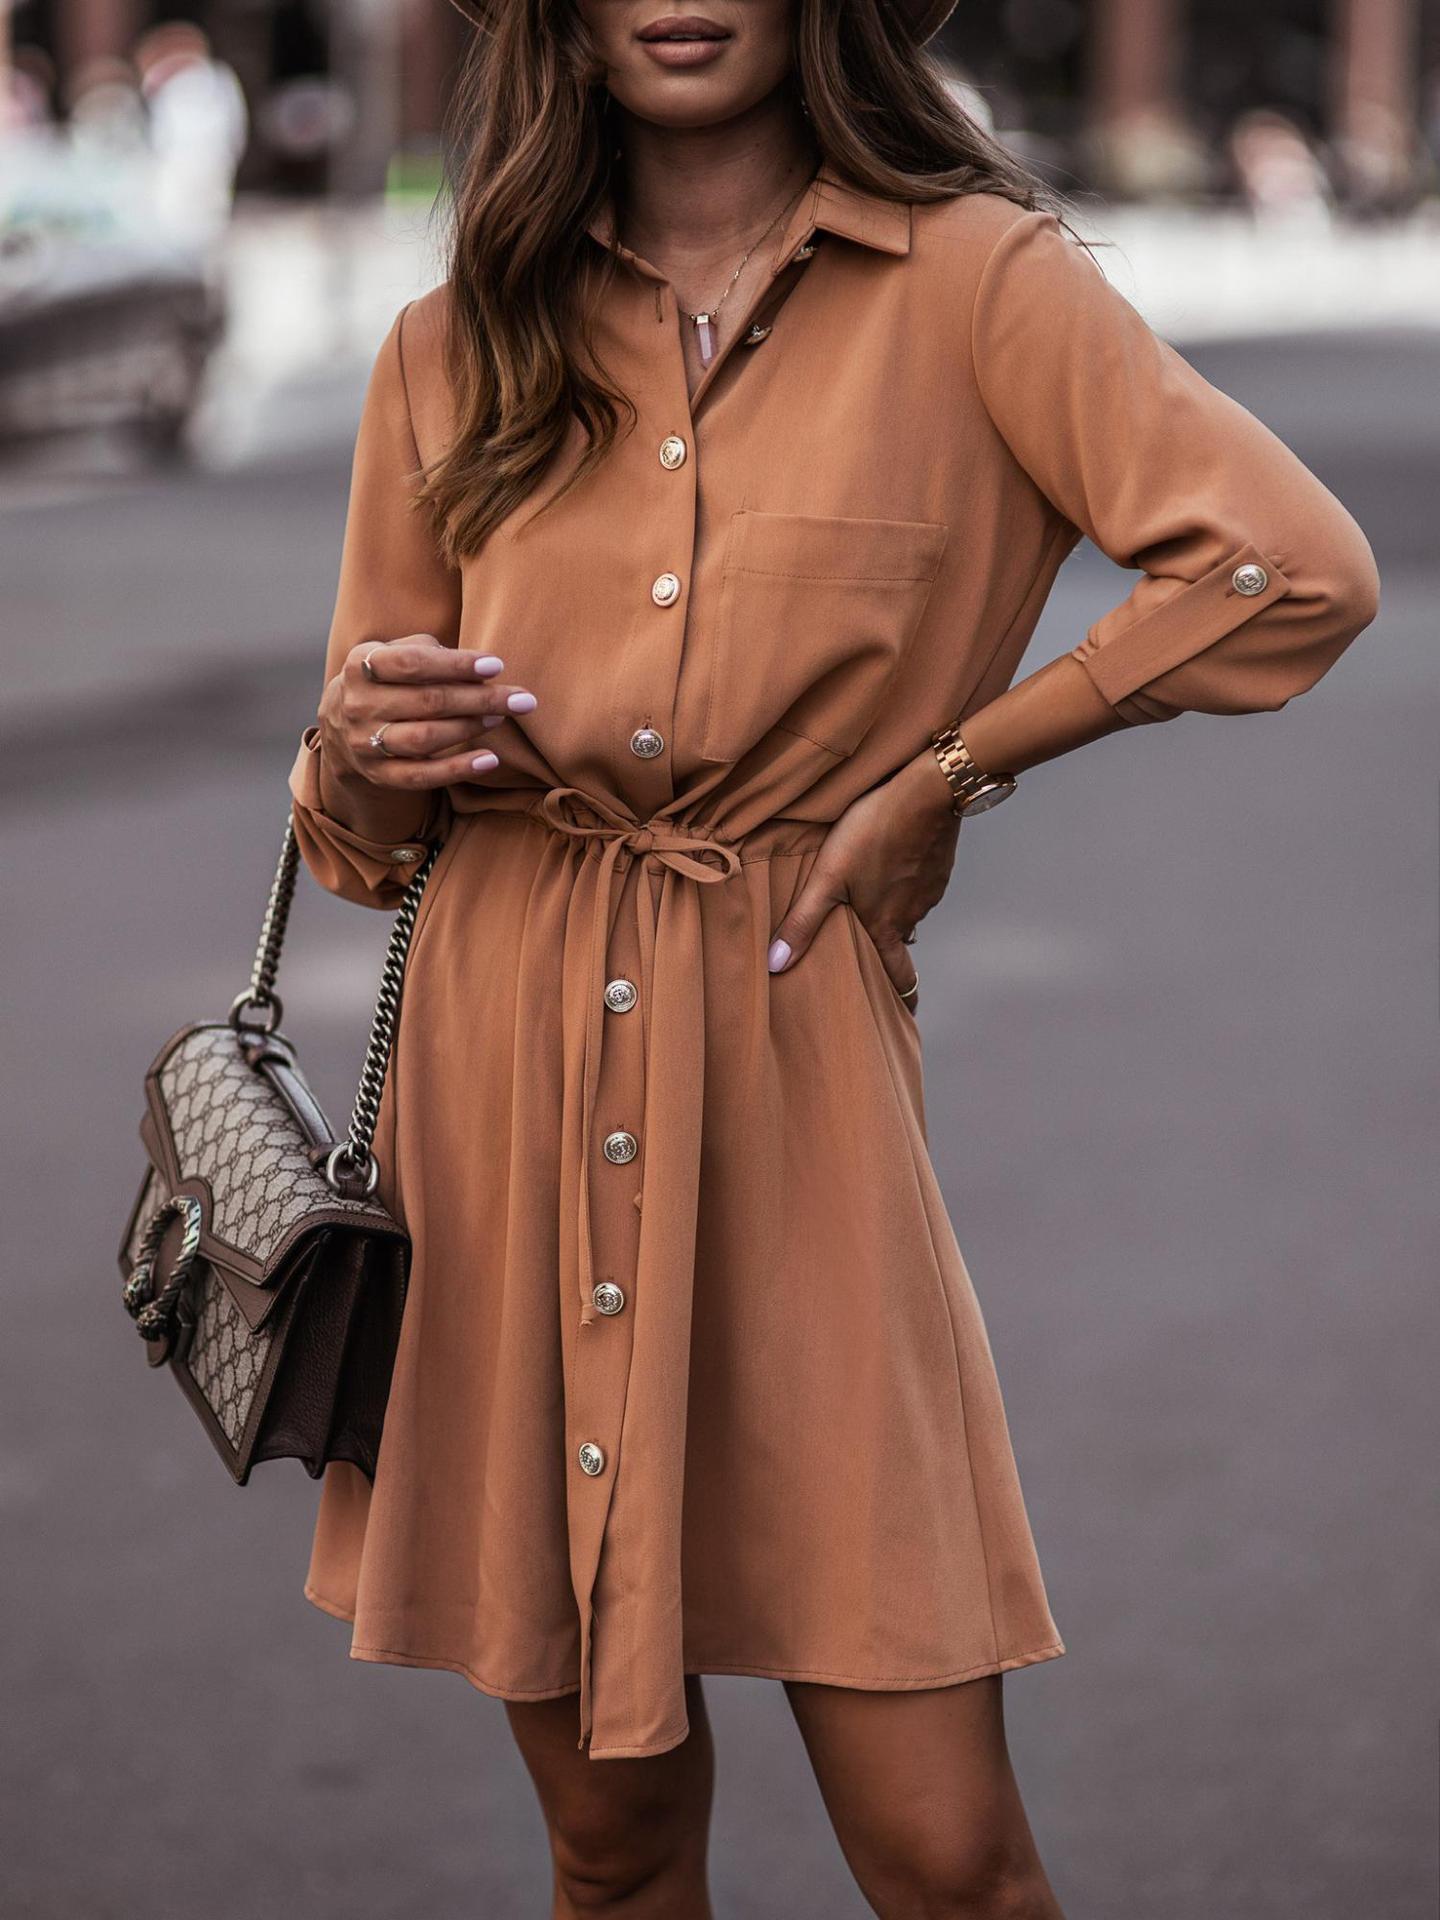 Solid Color Waist Belt With Buttons And Sleeves Dress